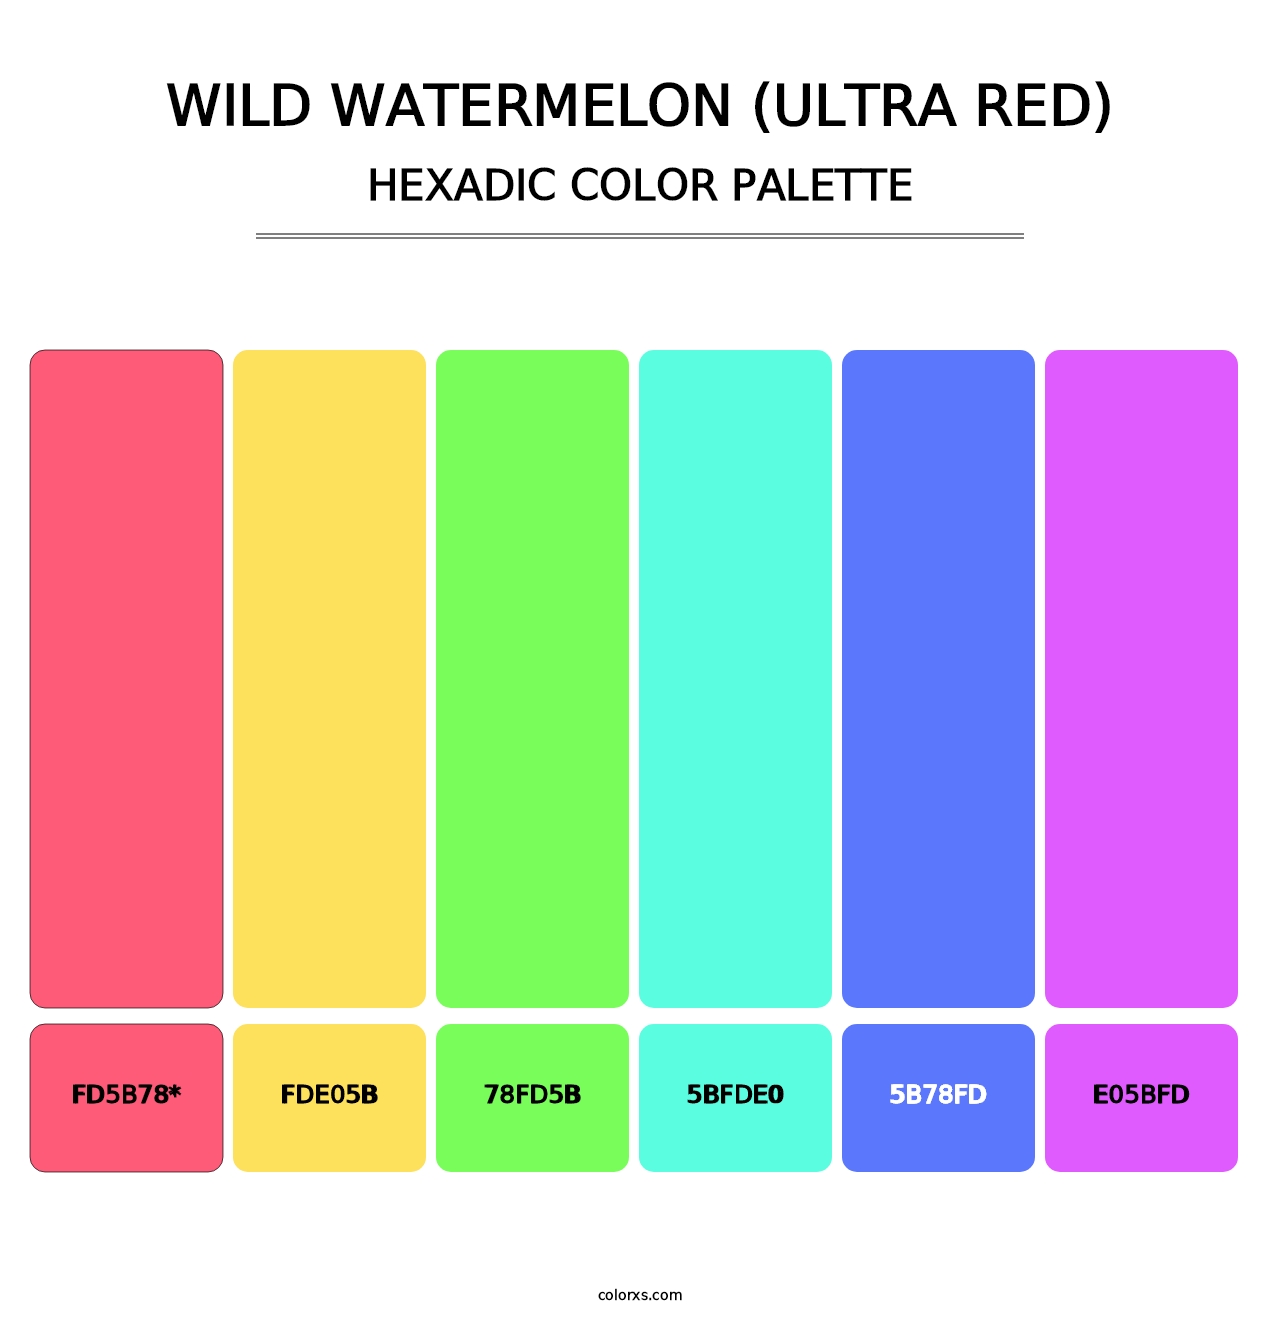 Wild Watermelon (Ultra Red) - Hexadic Color Palette